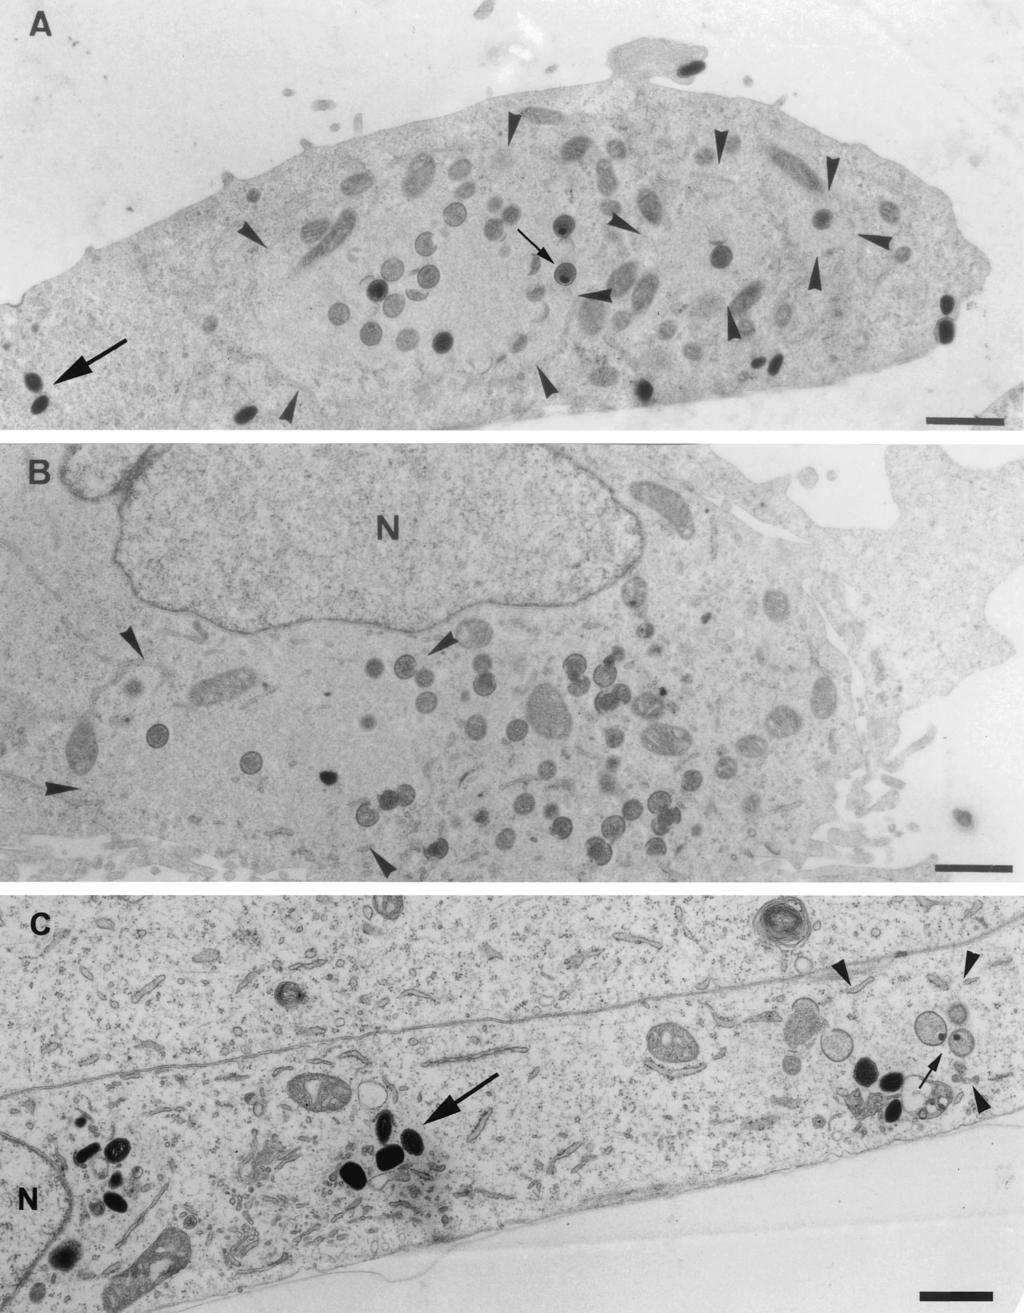 VOL. 76, 2002 MVA MORPHOGENESIS IN HeLa CELLS 8325 FIG. 5. Epon sections of HeLa cells infected with WR (A) or MVA (B) or BHK cells infected with MVA (C) at 8 h postinfection.